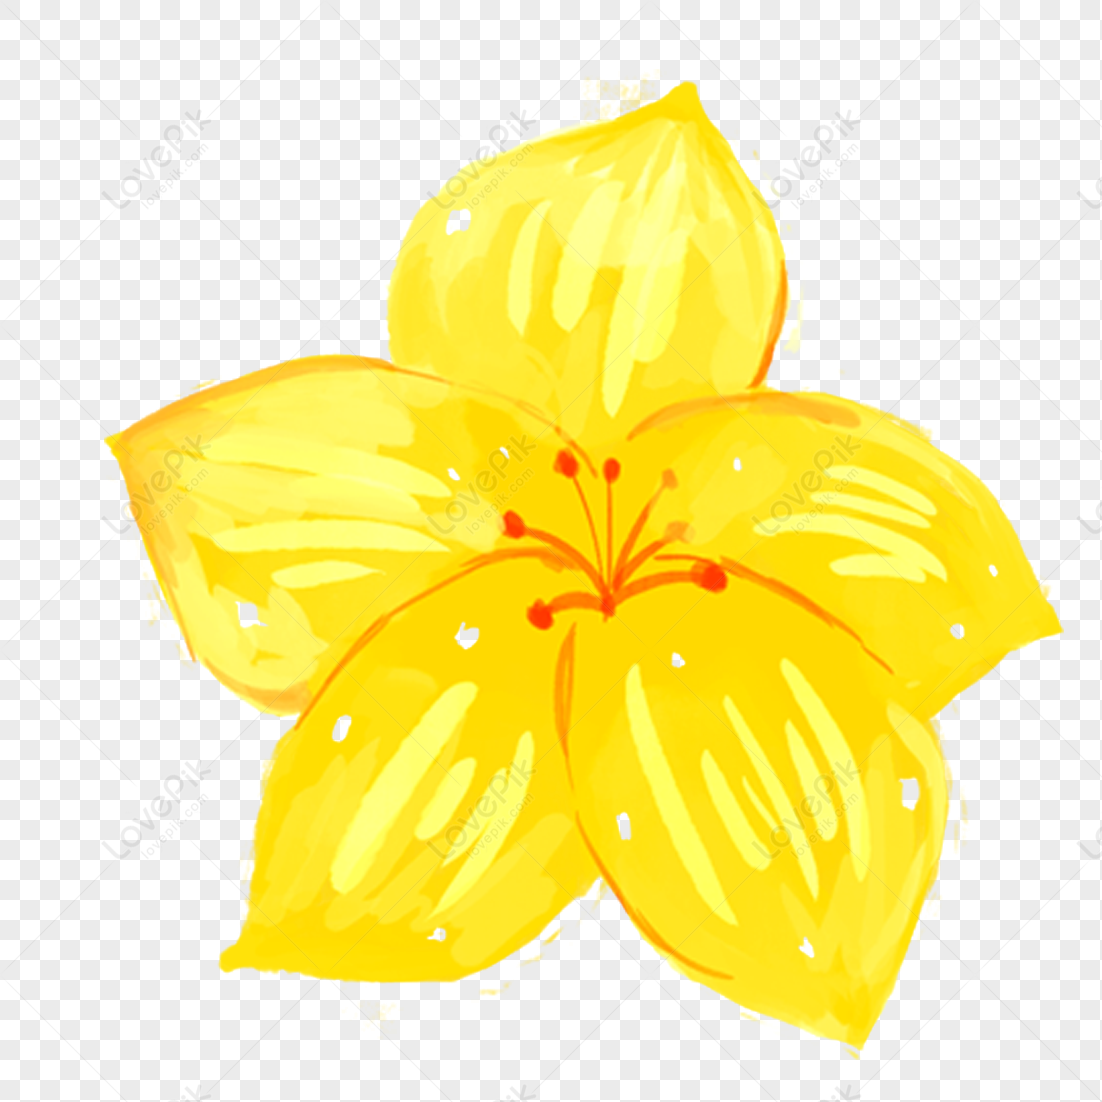 Hand Painted Flower Design Image PNG Transparent And Clipart Image For ...